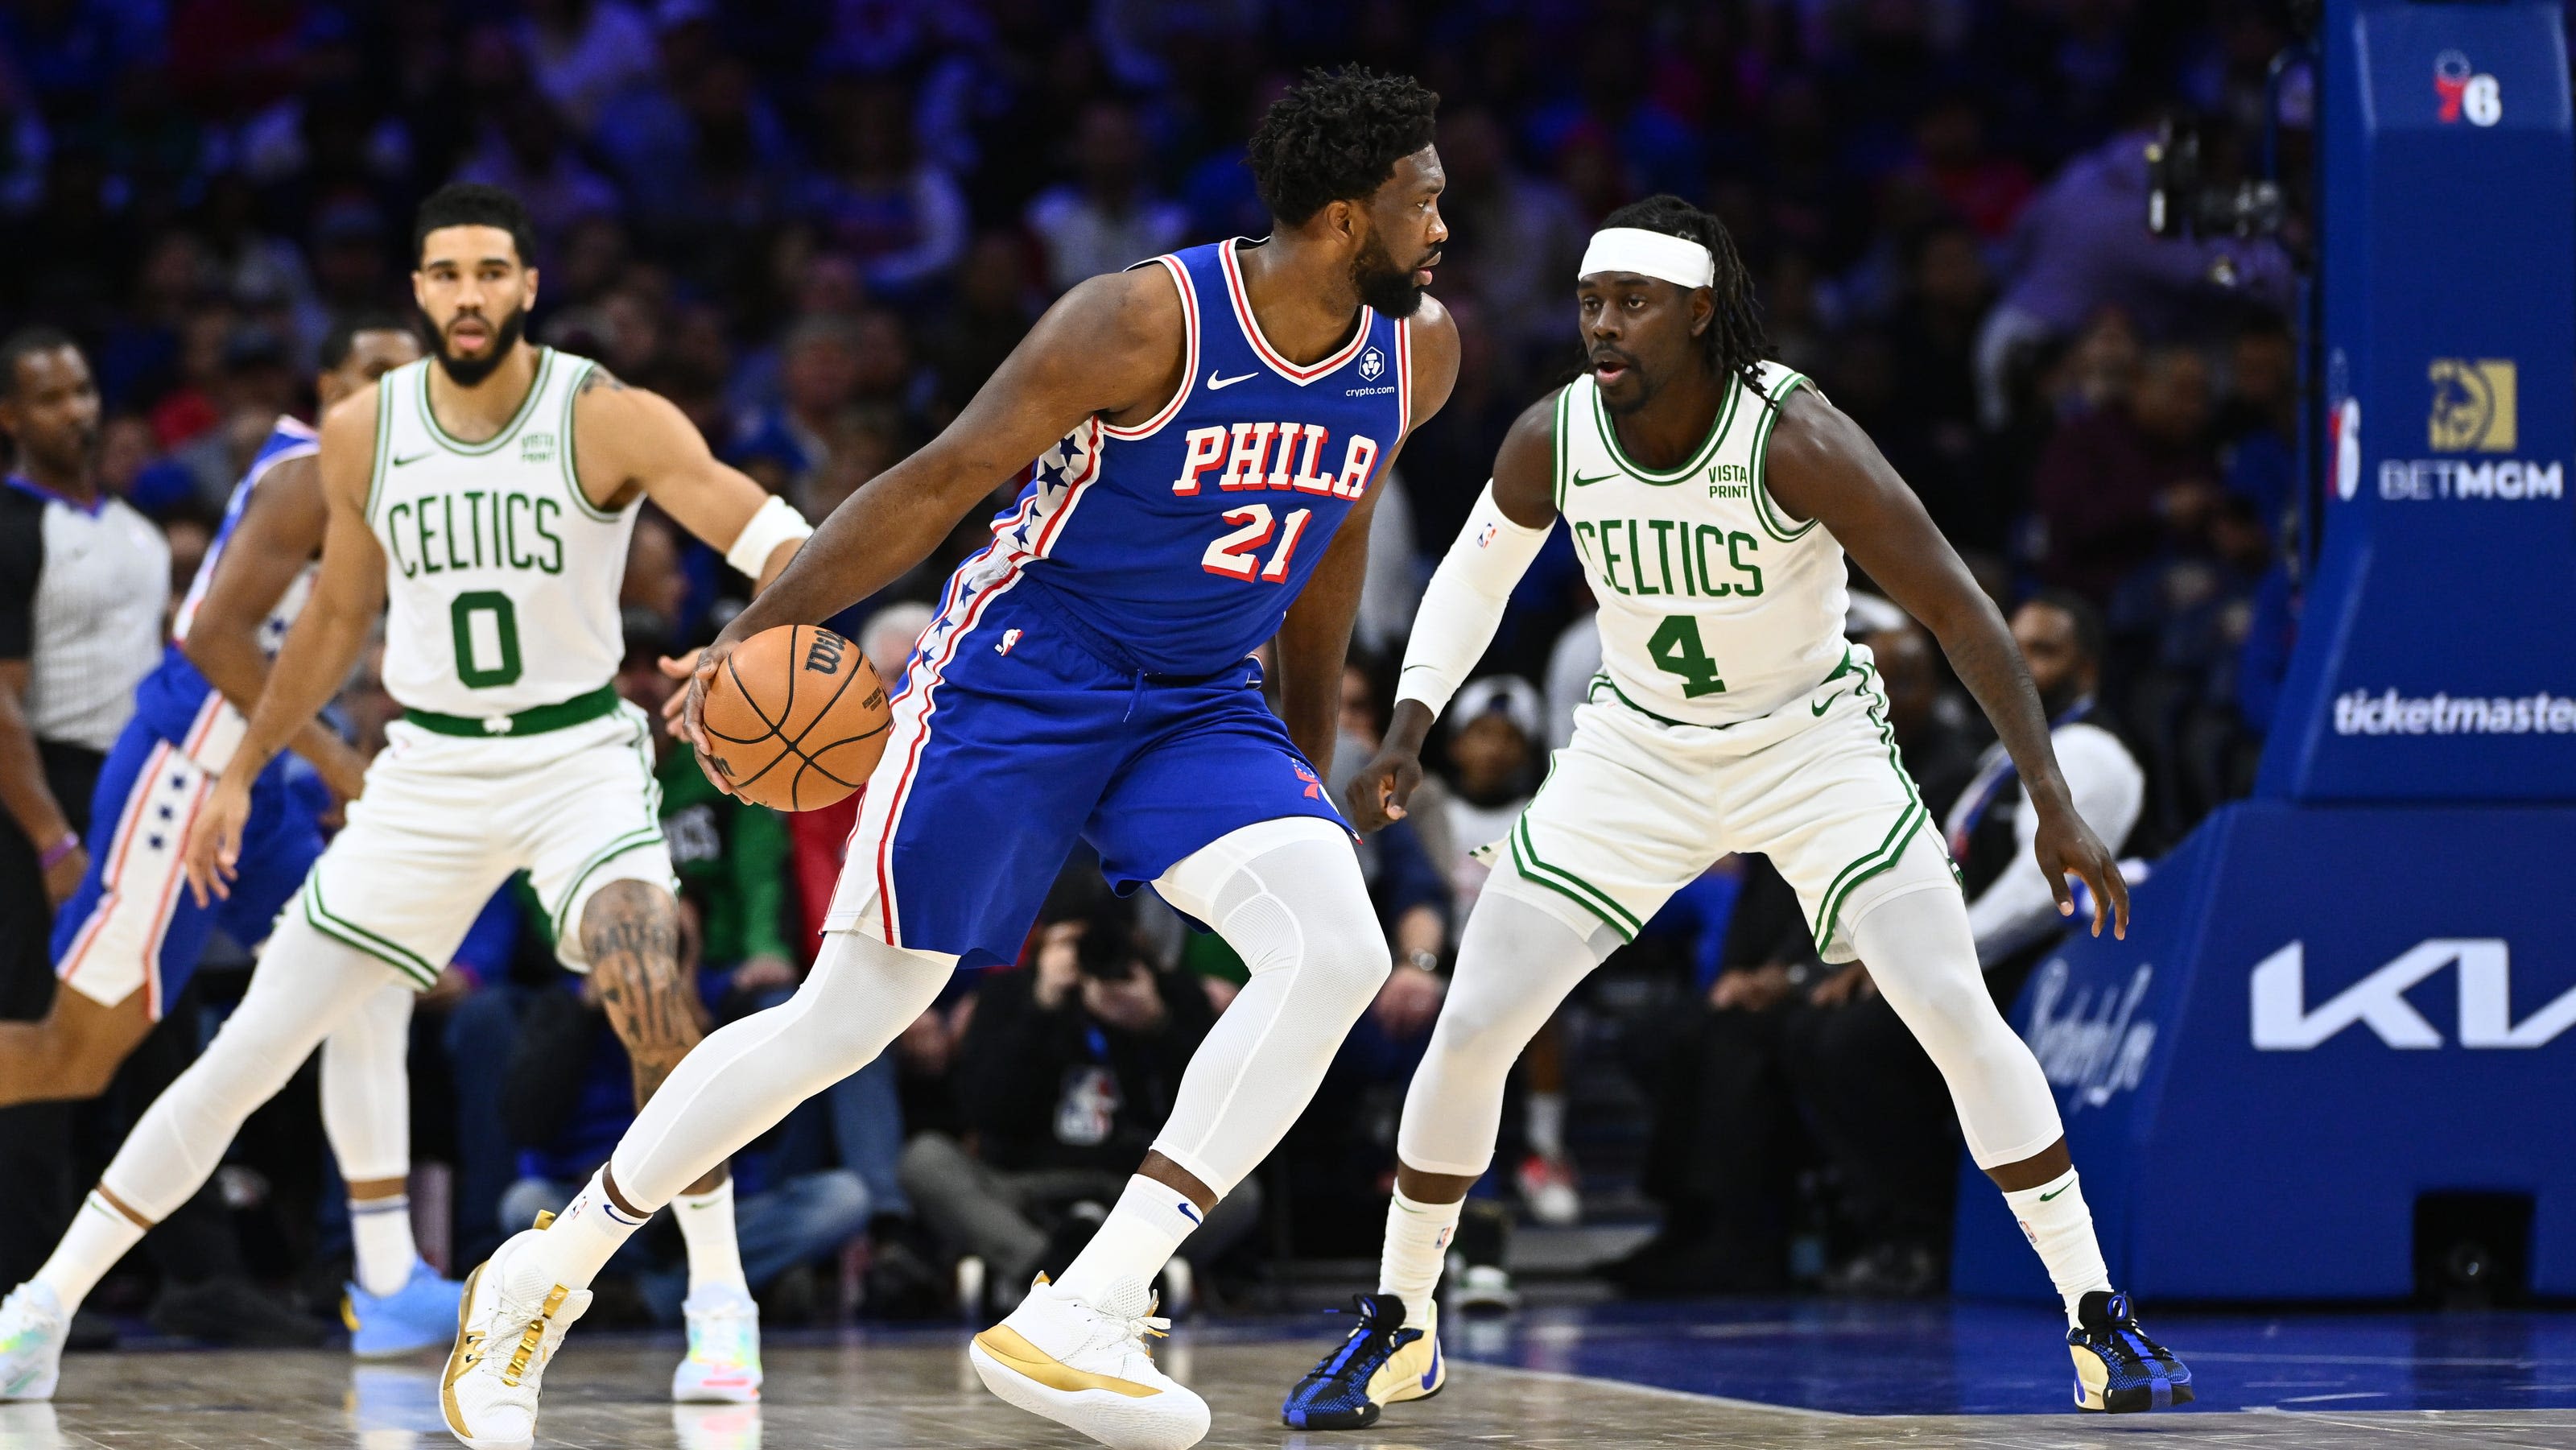 Should the Boston Celtics be worried about the Sixers?